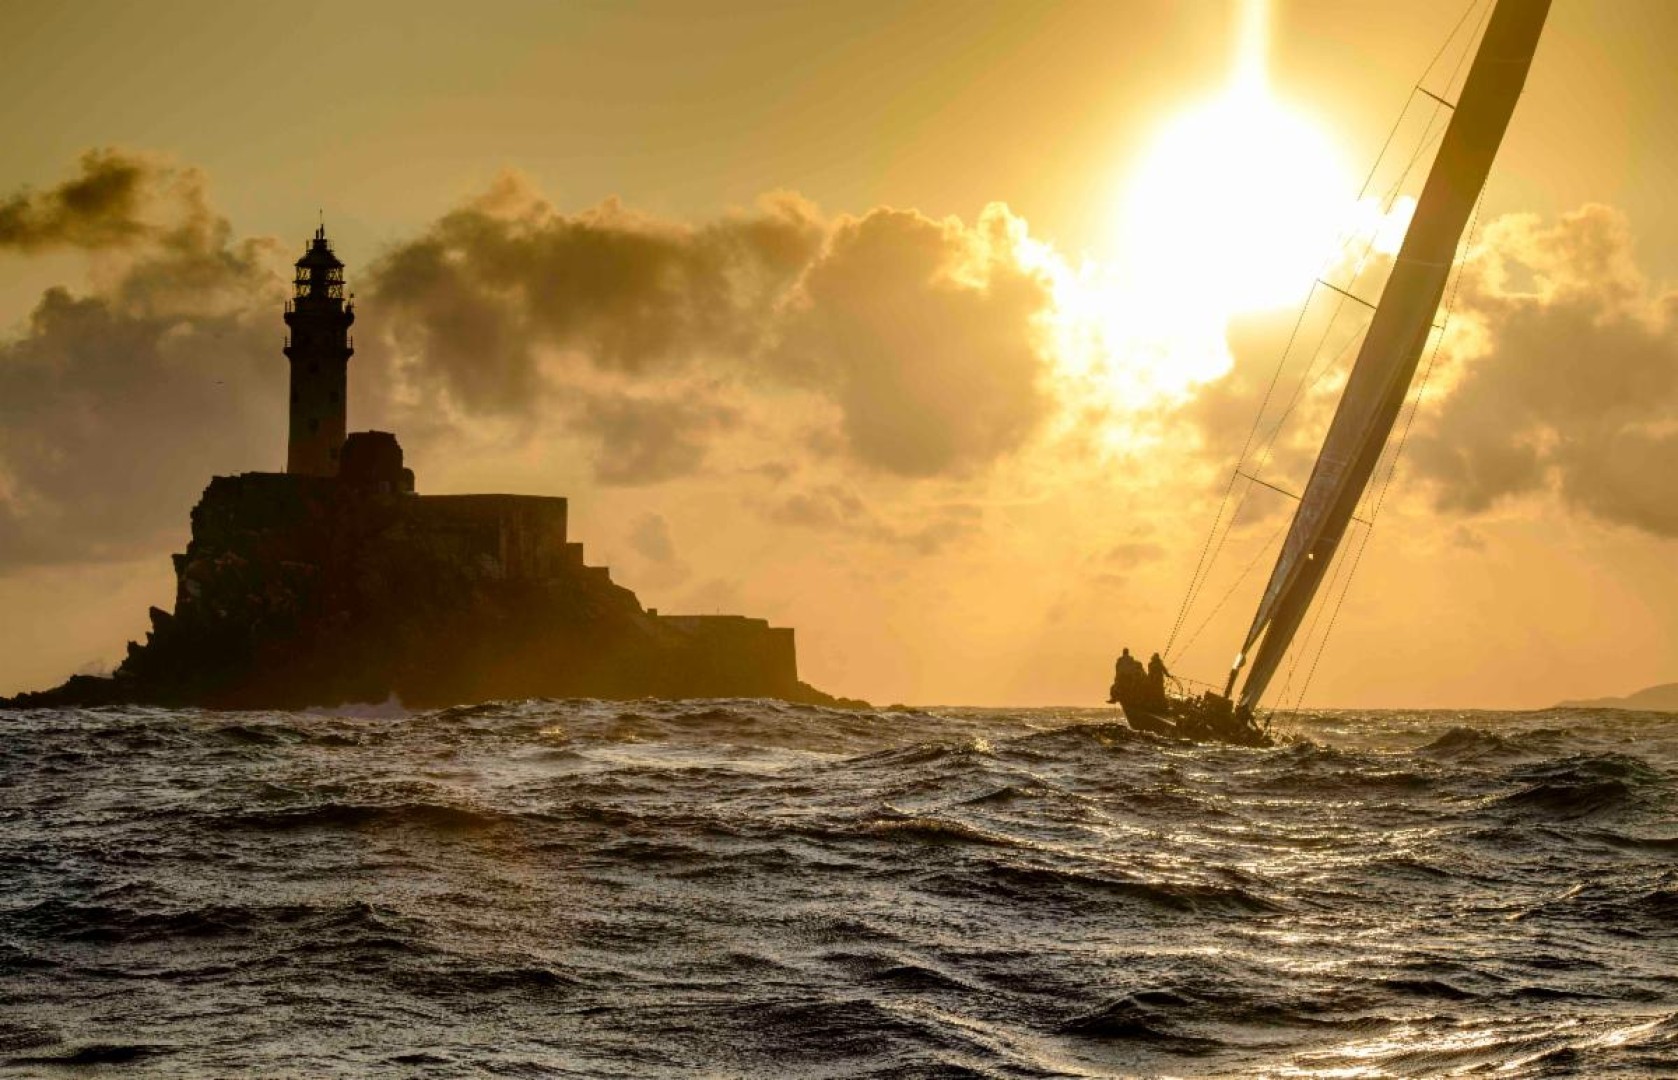 Competitors are urged by RORC to set up their accounts NOW on the new race entry system prior to registration opening for the Rolex Fastnet Race